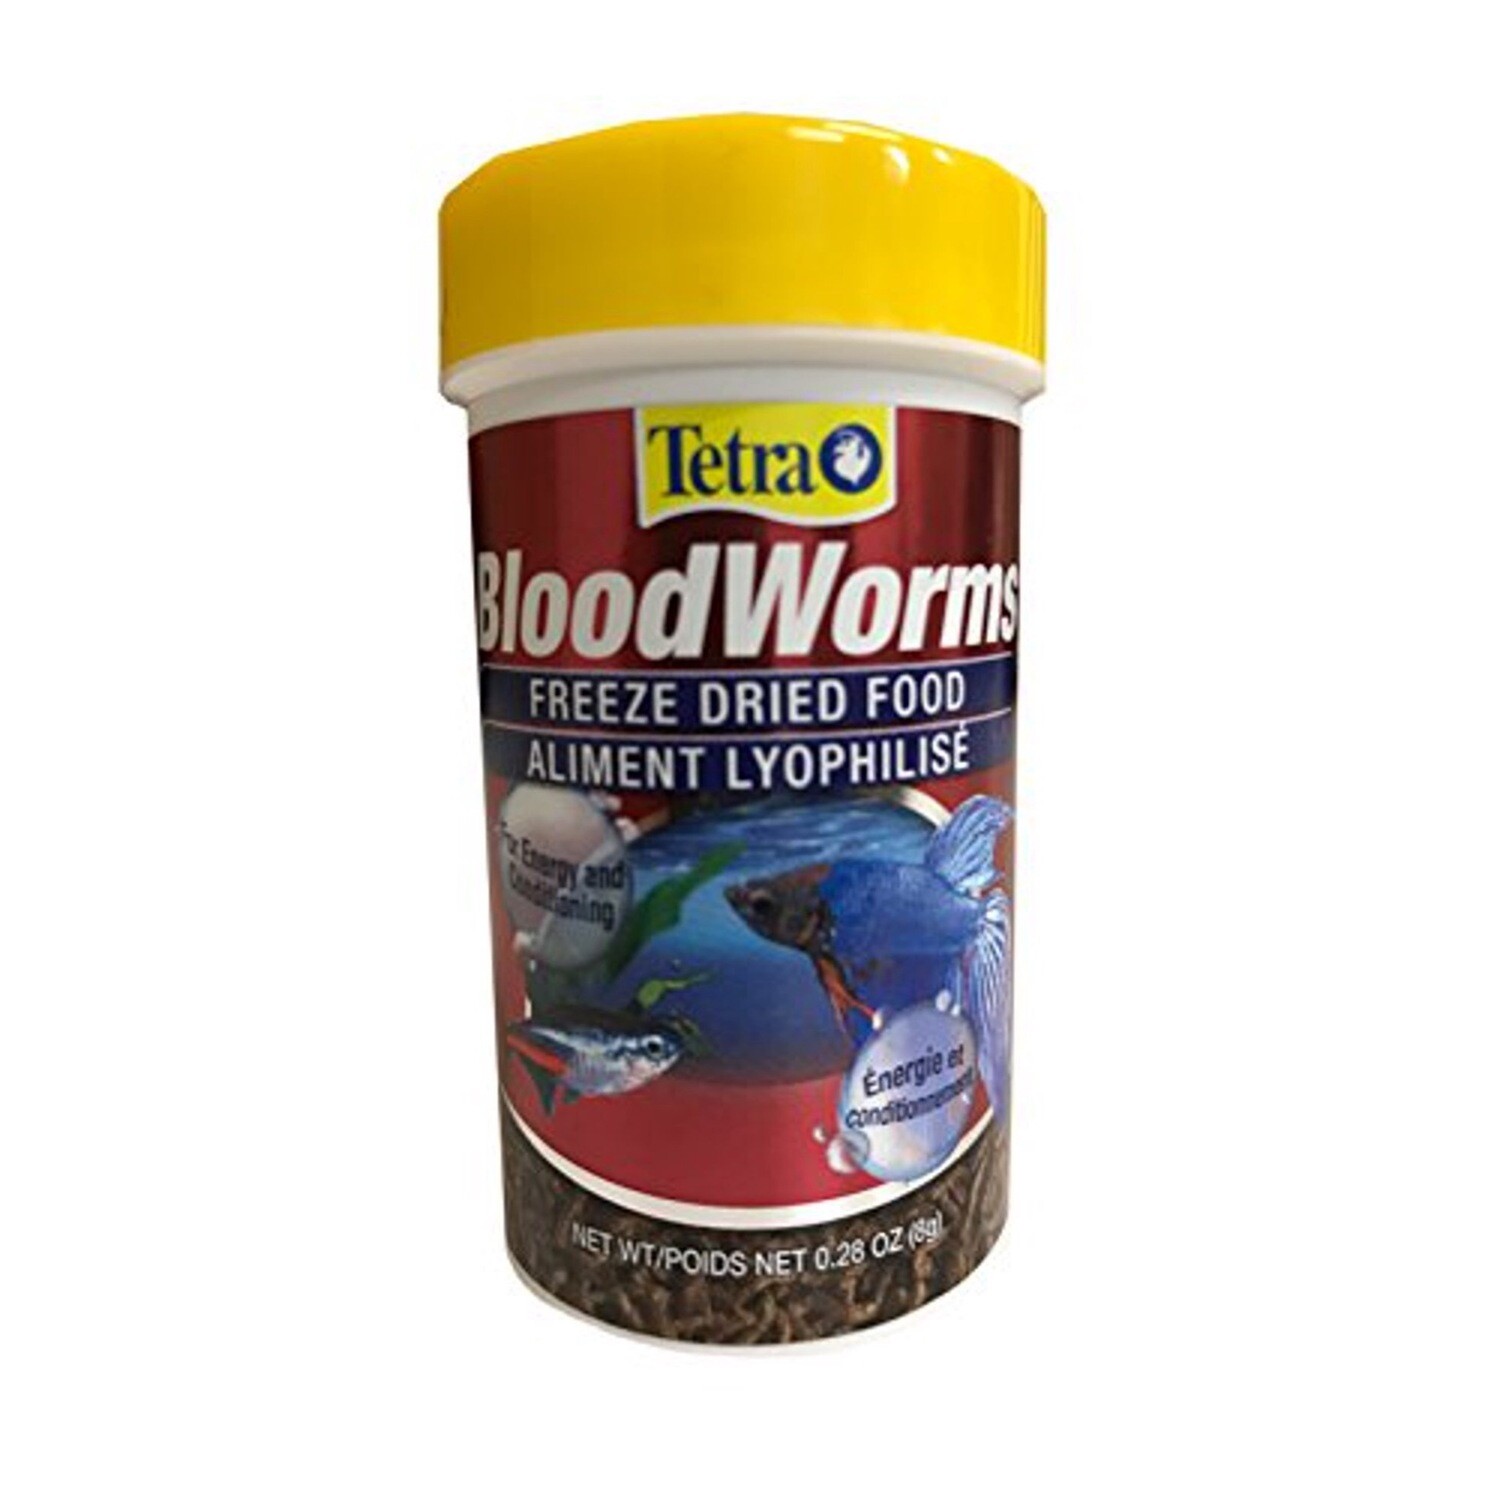 Tetra Bloodworms, Freeze Dried Fish Food for Medium-Sized Tropical Fish, 8g